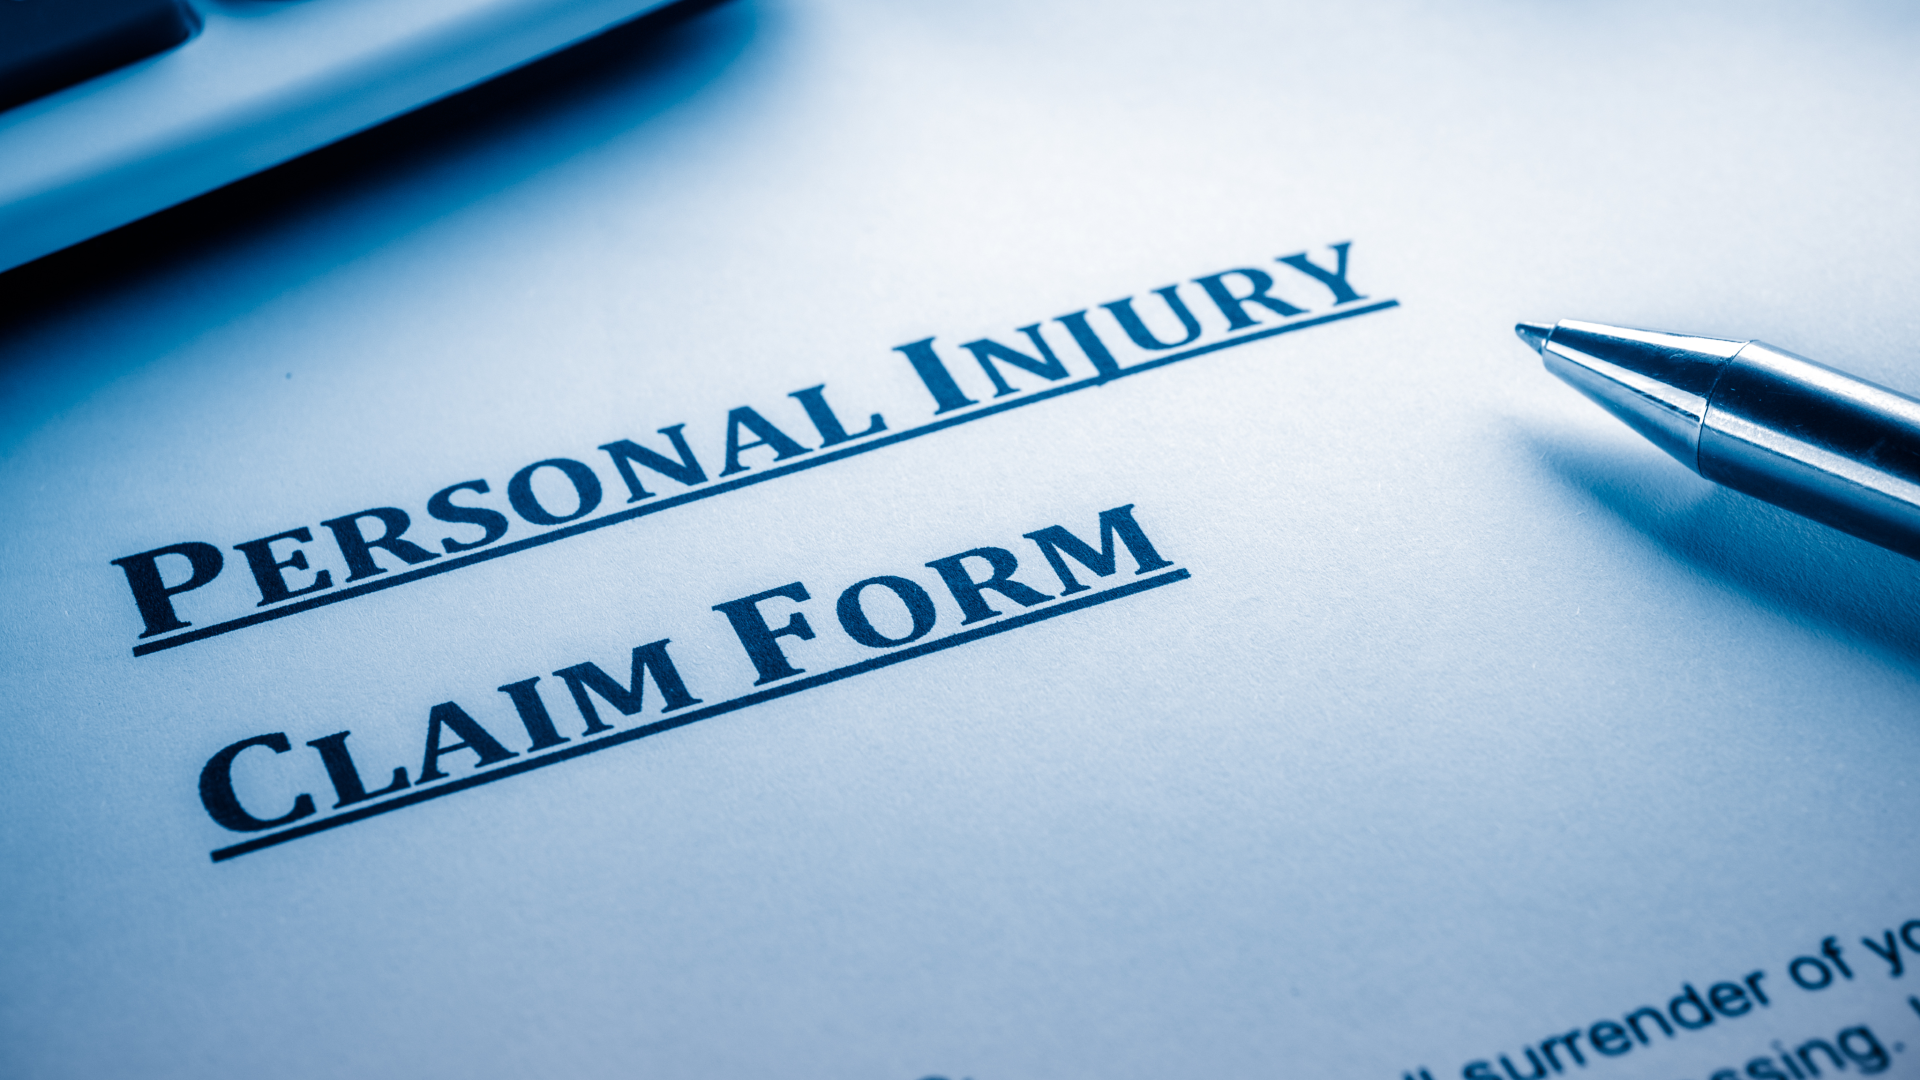 A personal injury claim form with a pen resting on top of it